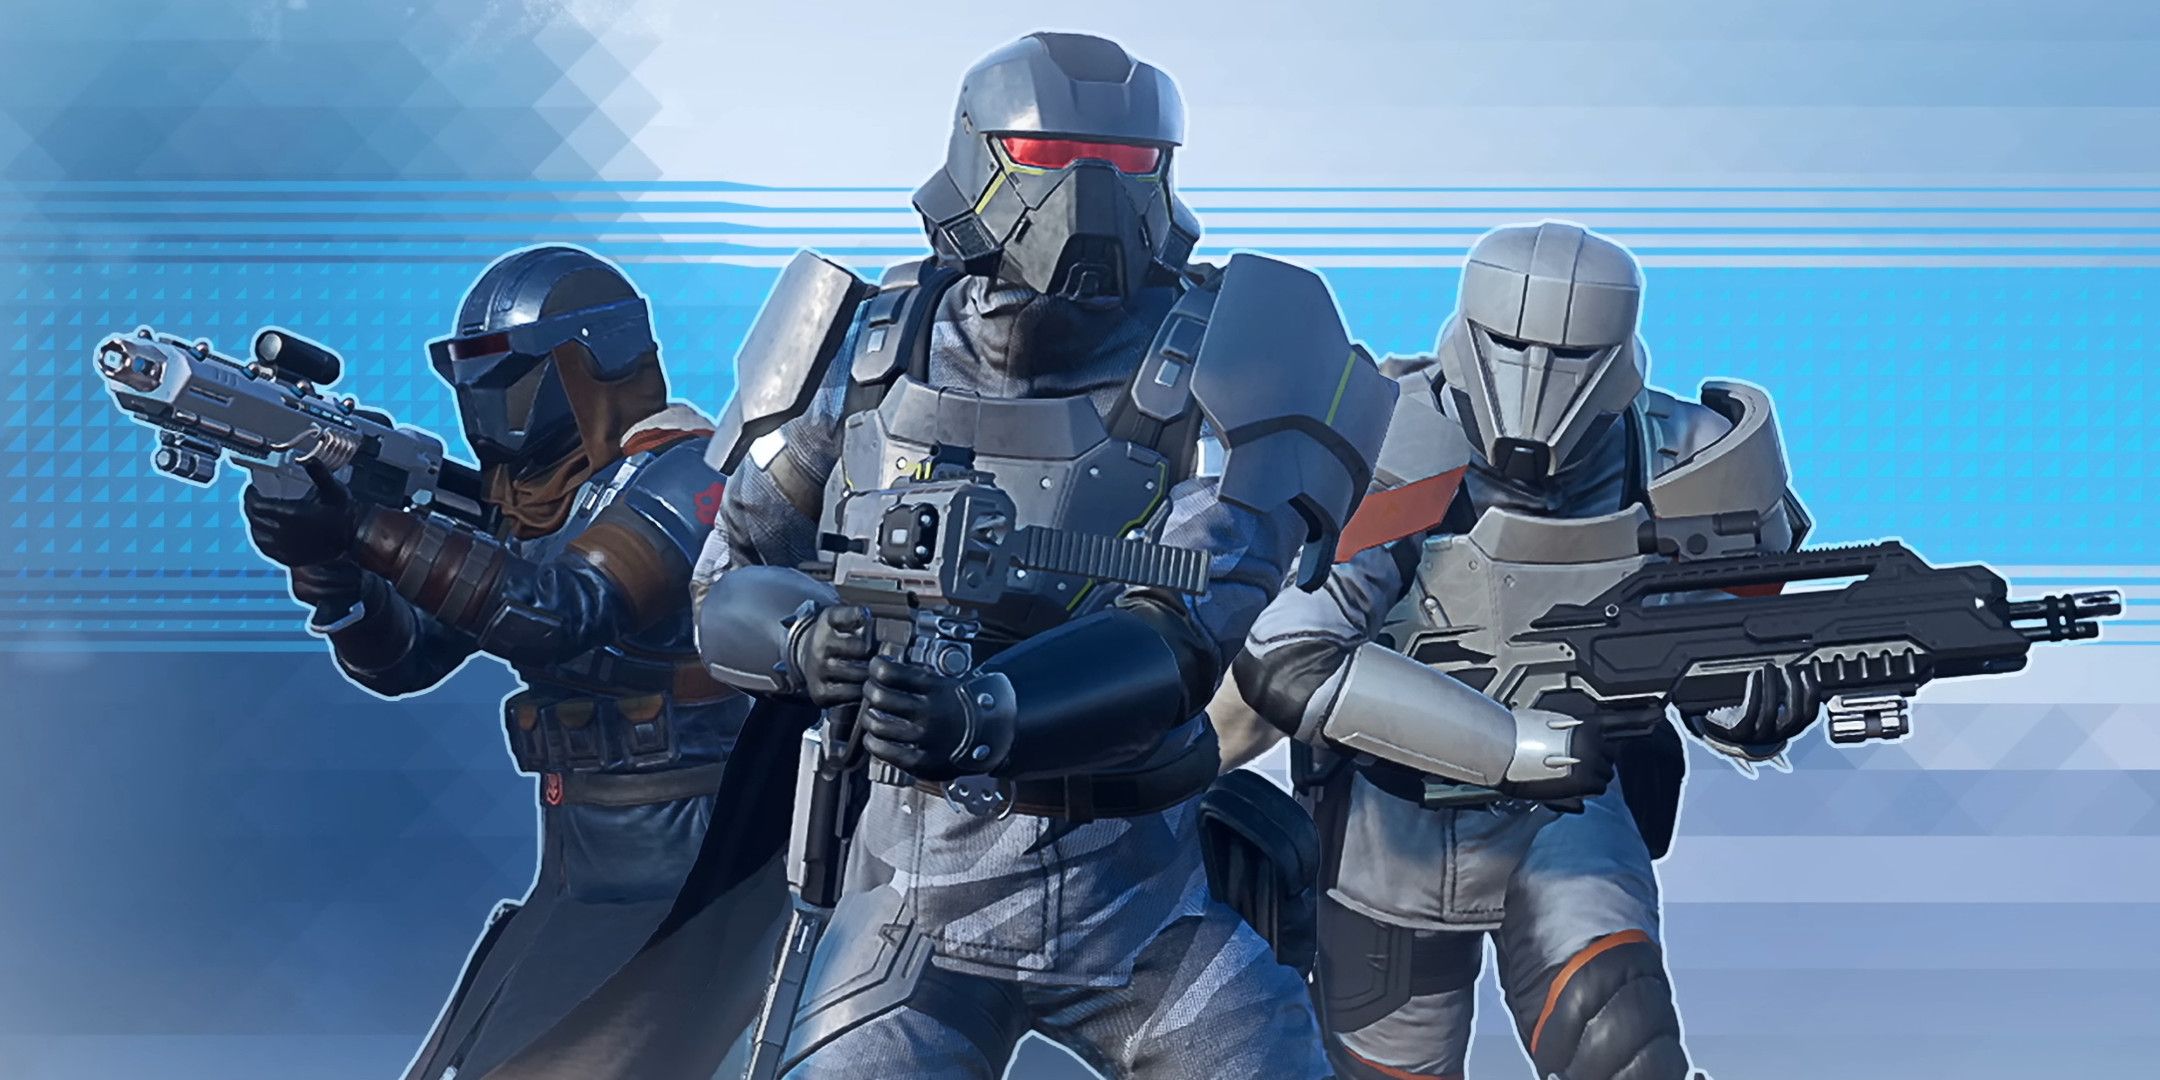 Three Helldivers soldier in various armor holding different weapons on a blue background